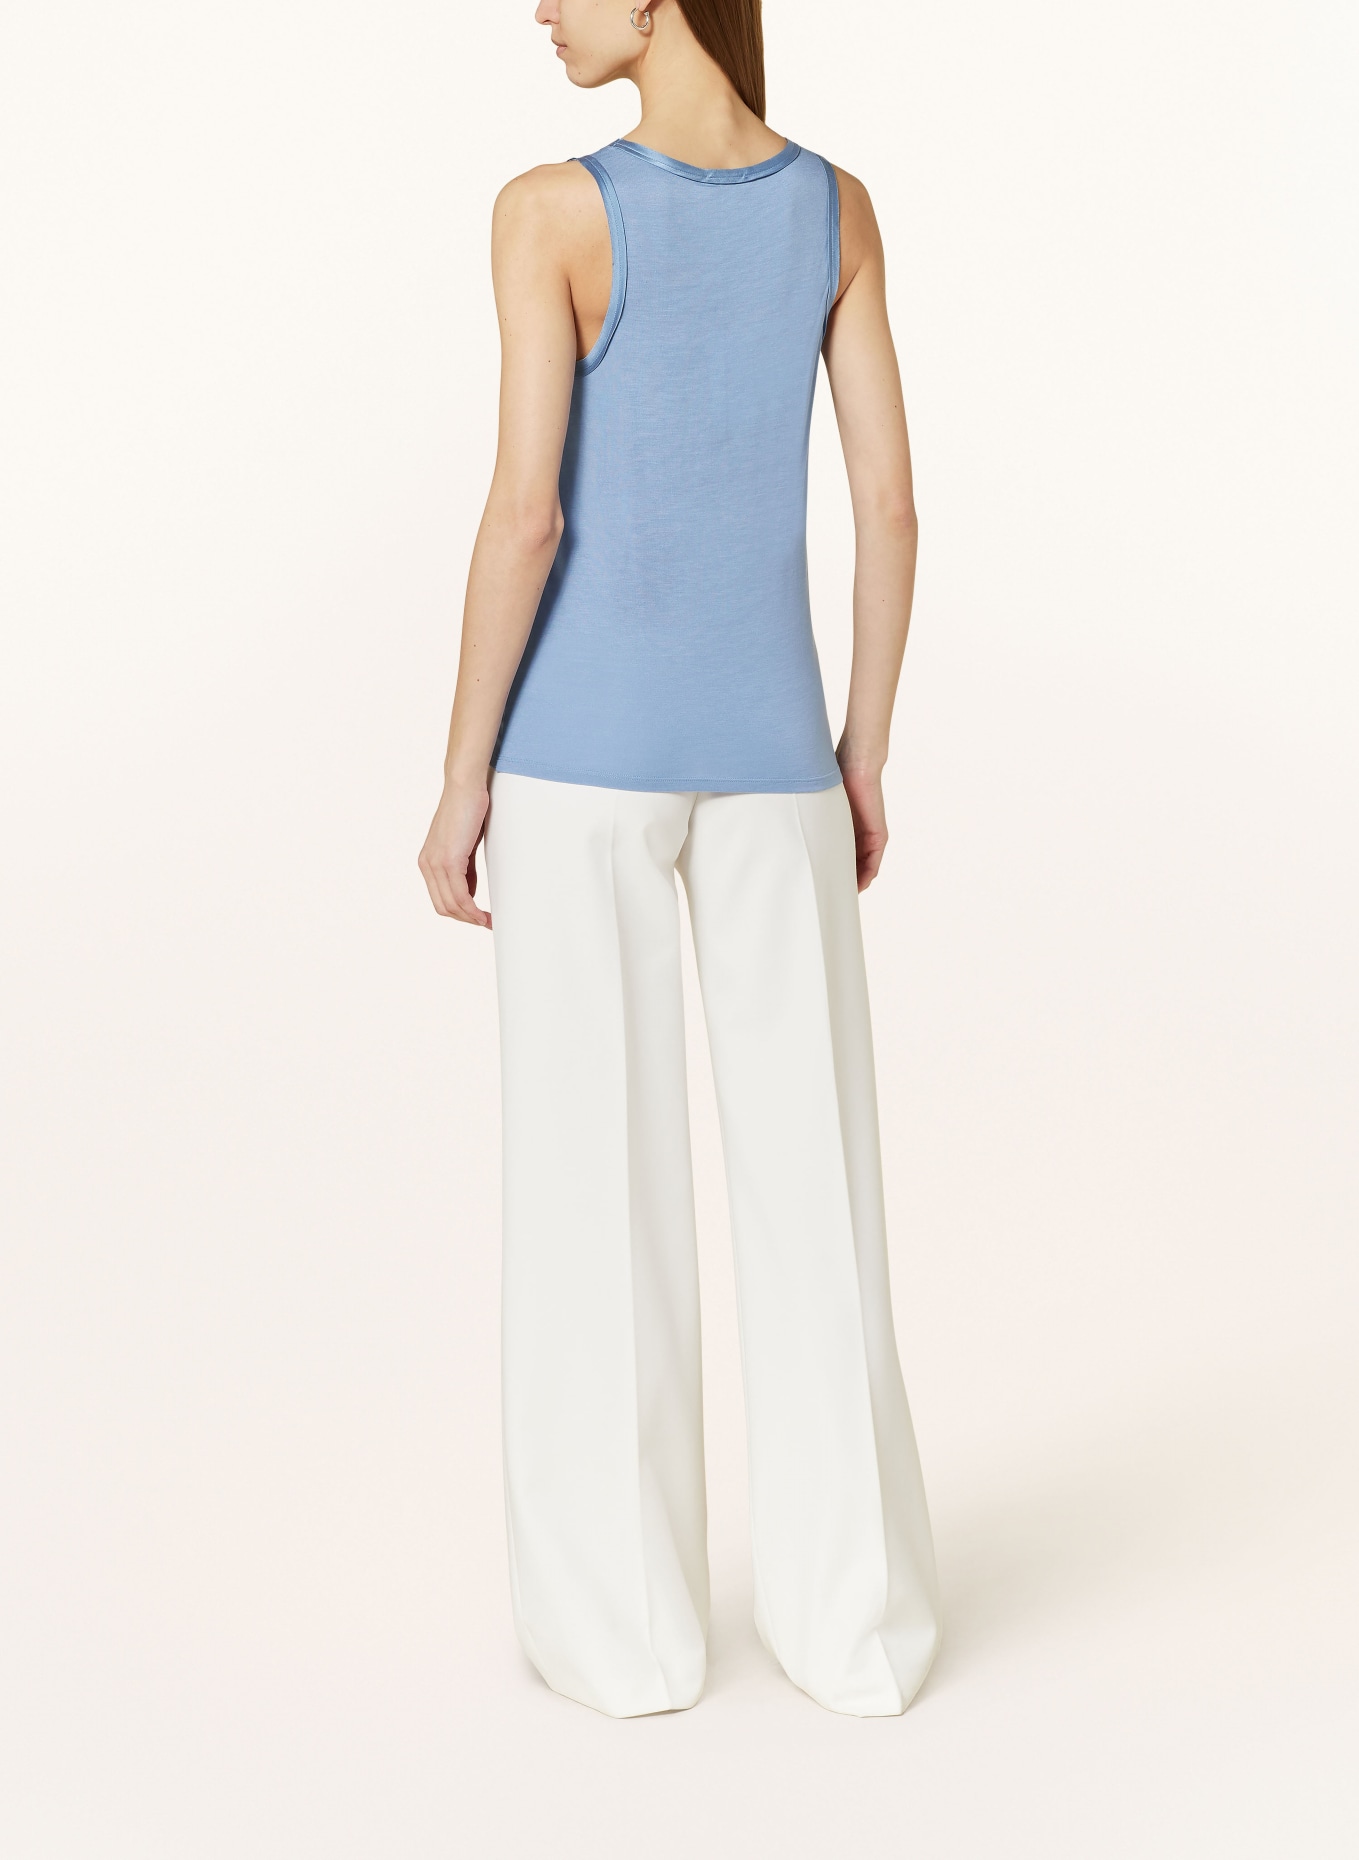 REISS Top RILEY in mixed materials, Color: BLUE (Image 3)